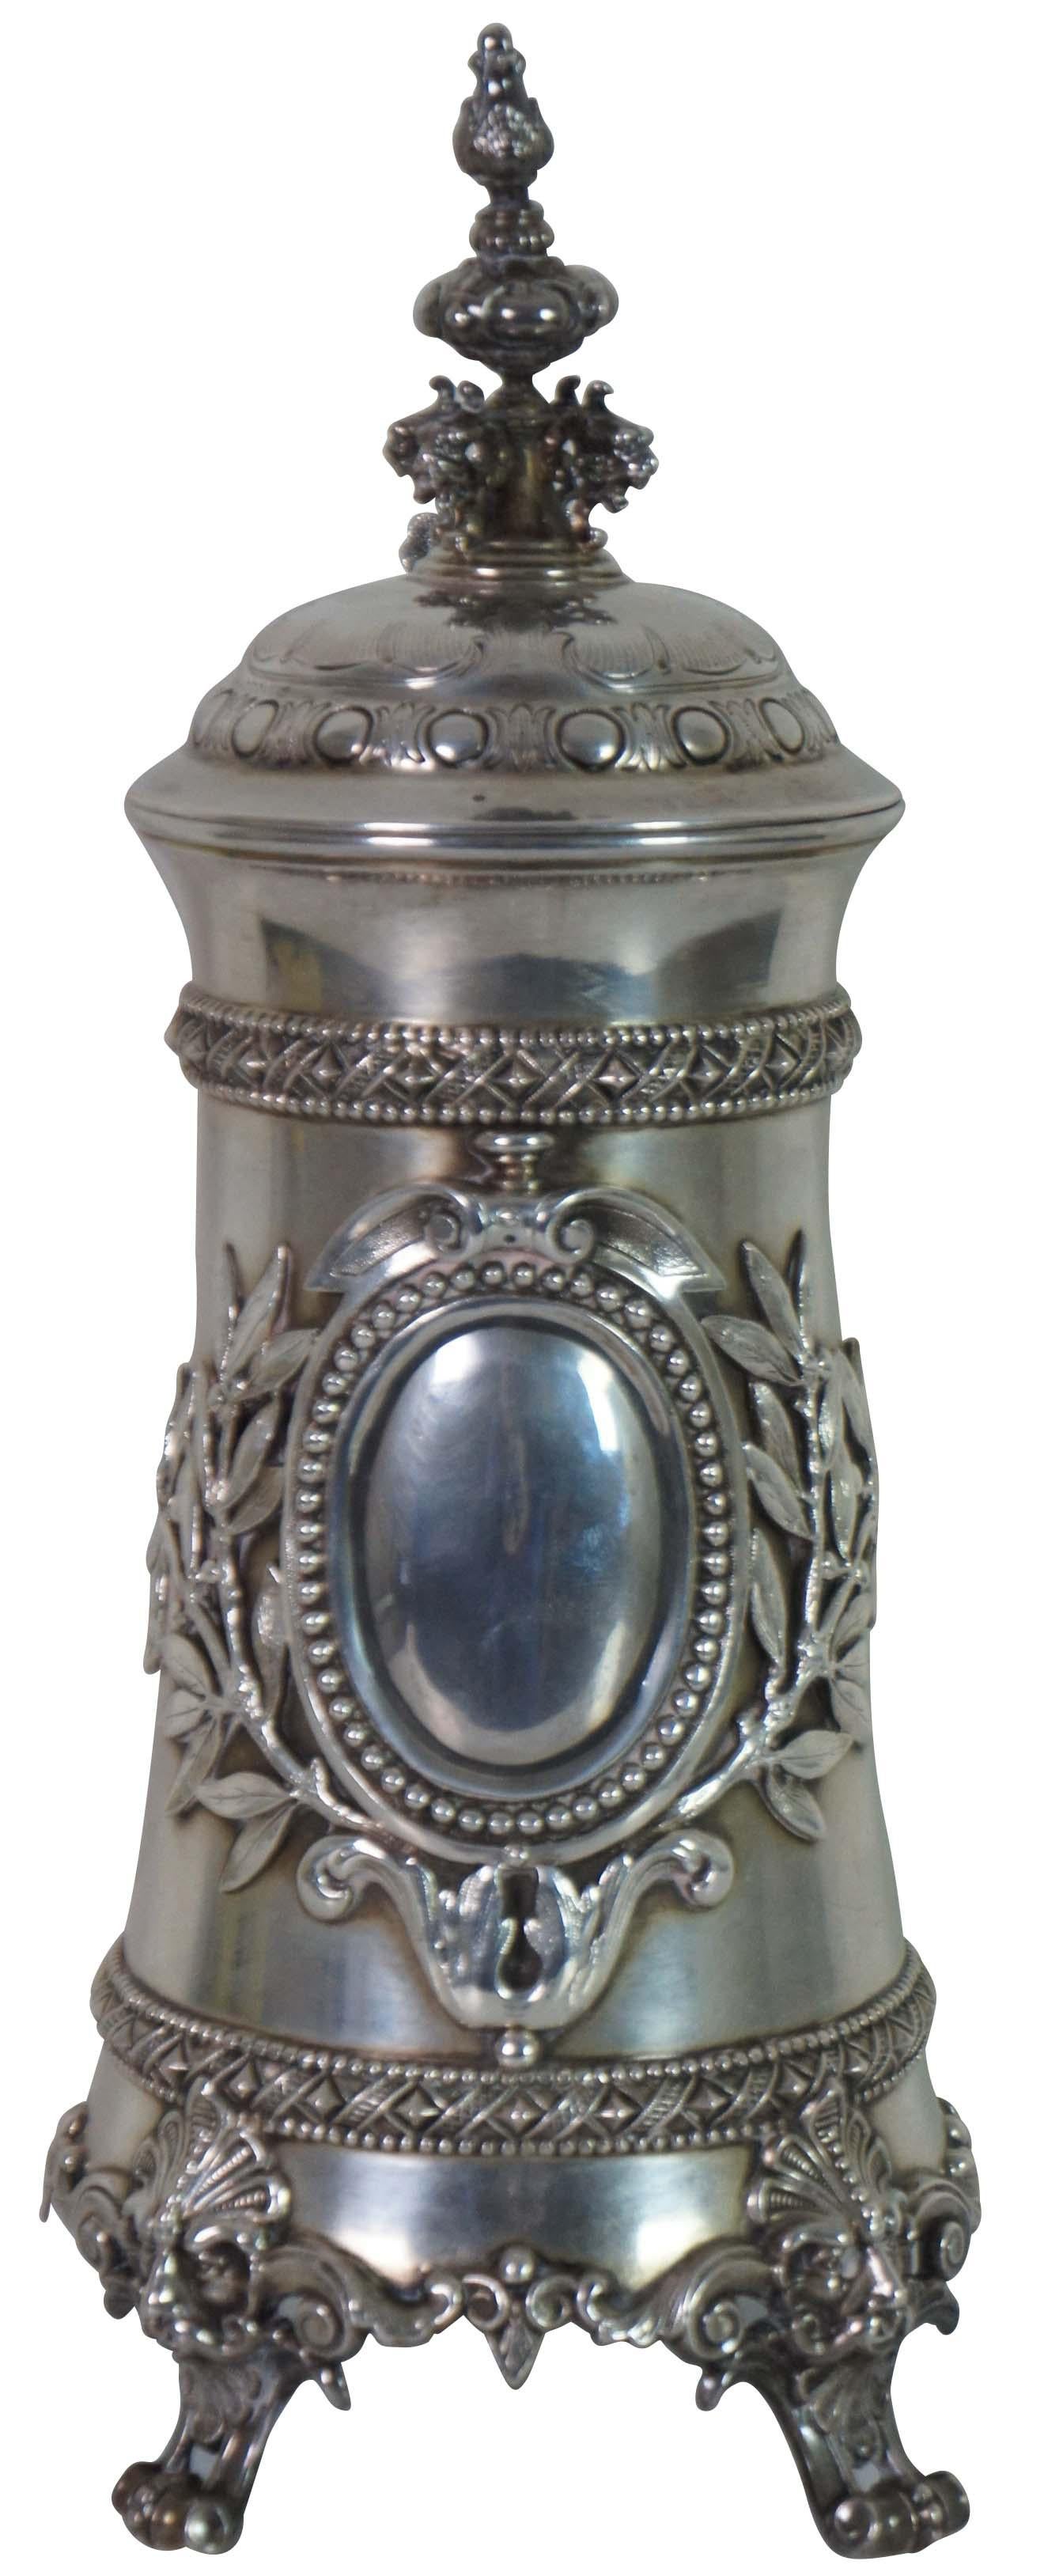 Rare antique 19th century Dutch lidded and footed 800 silver tankard/stein / pitcher, with ornate designs, faces and finial; gilded interior. Marked on base “JW 800M.”

Provenance: Jerome Schottenstein Estate, Columbus Ohio. Jerome was was an